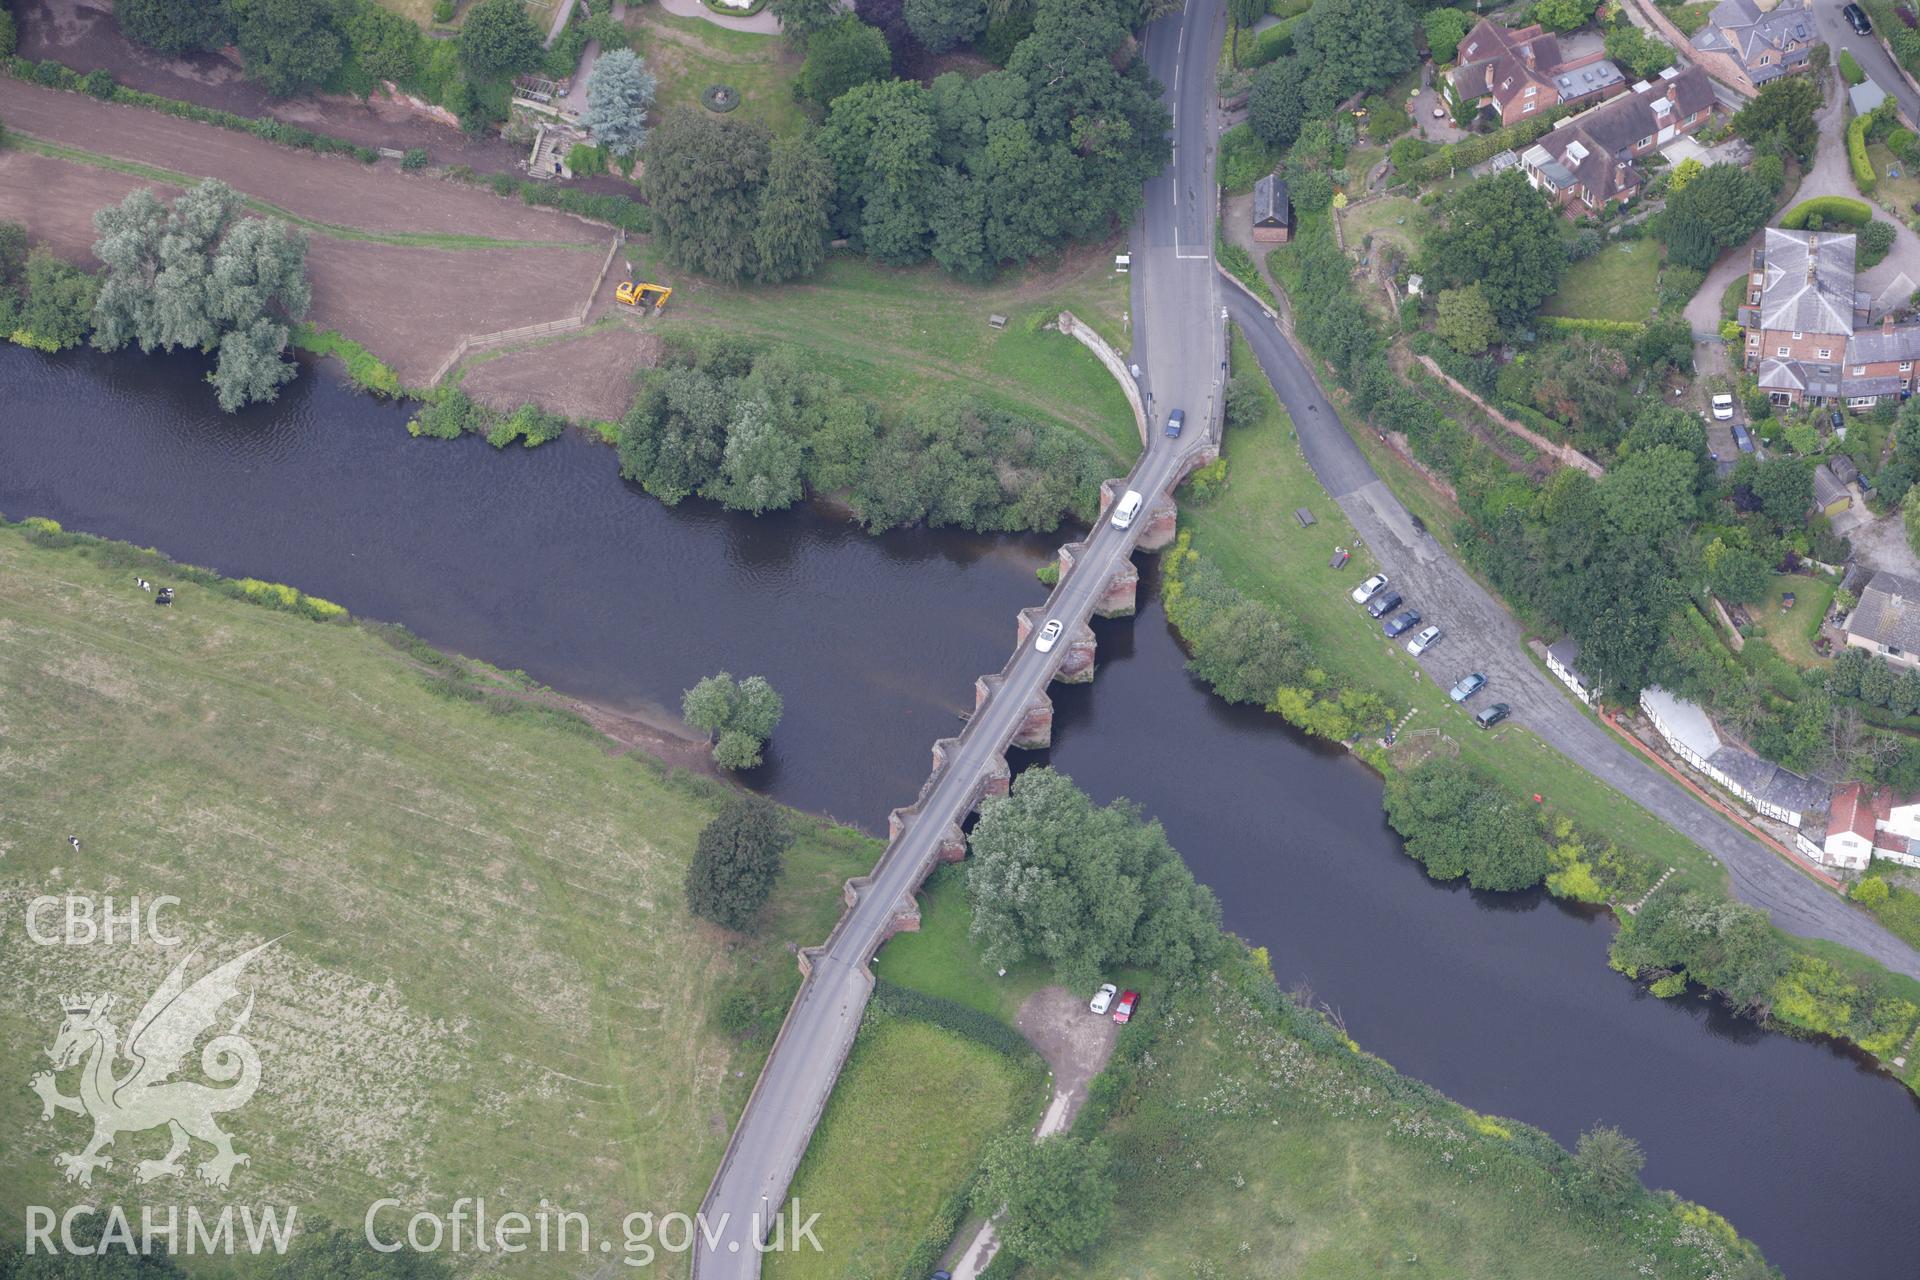 RCAHMW colour oblique aerial photograph of Holt Bridge. Taken on 08 July 2009 by Toby Driver